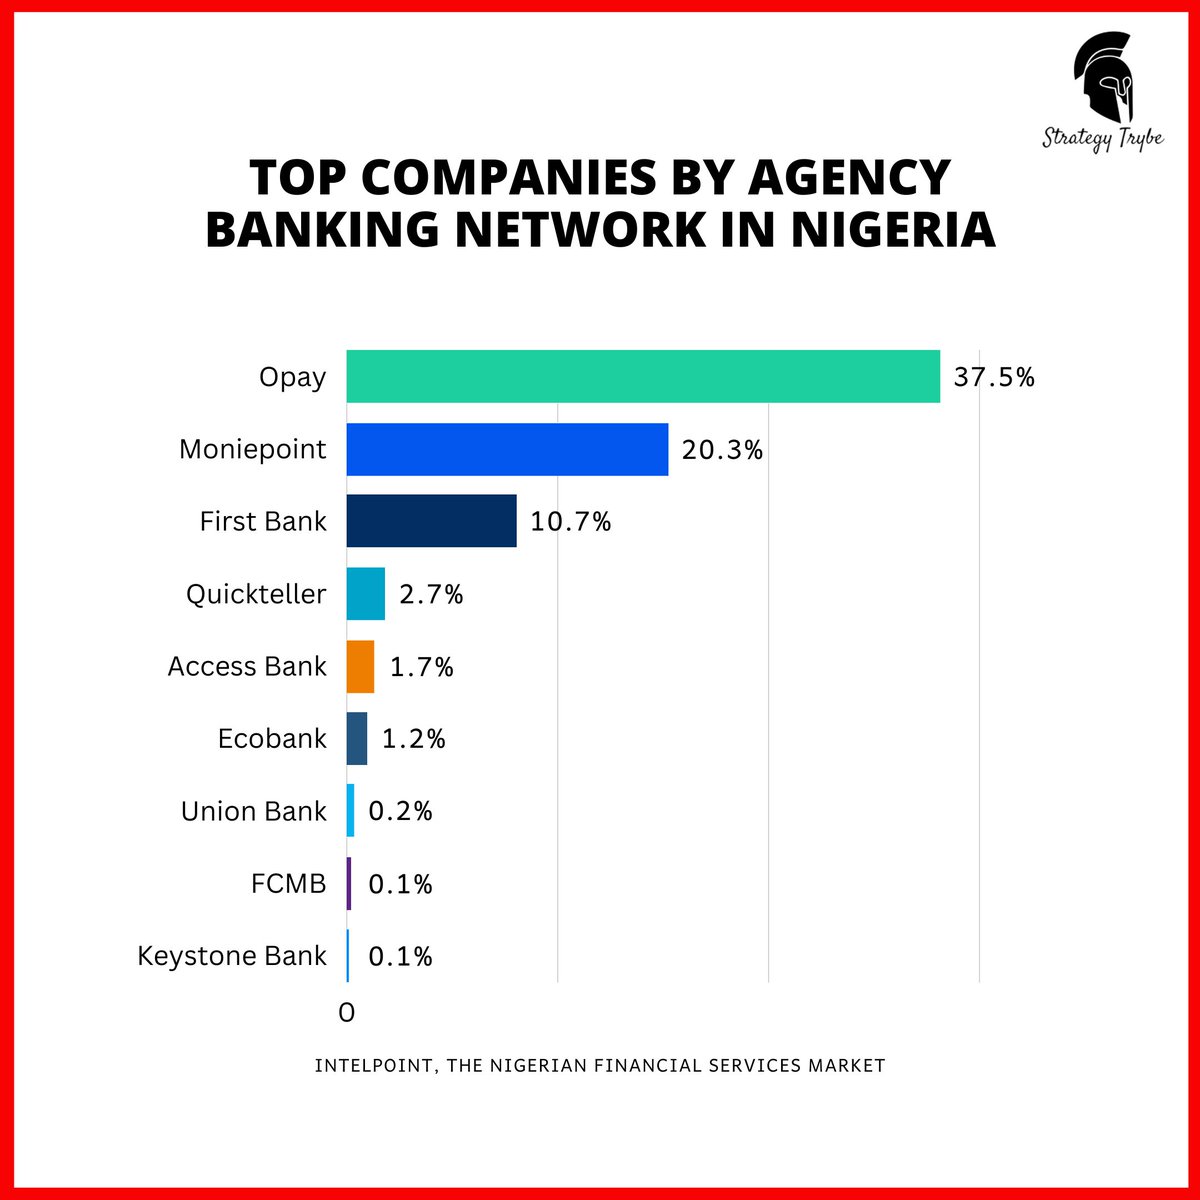 Opay and Moniepoint control 57.8% of Nigeria's 1.5m POS operators. What do you think are the drivers behind this immense growth from both brands? Reply in the comment section.

#StrategyTrybe #Payment #Fintech #Strategy #AccountPlanning #MarketingCommunications  #Lagos #Nigerians